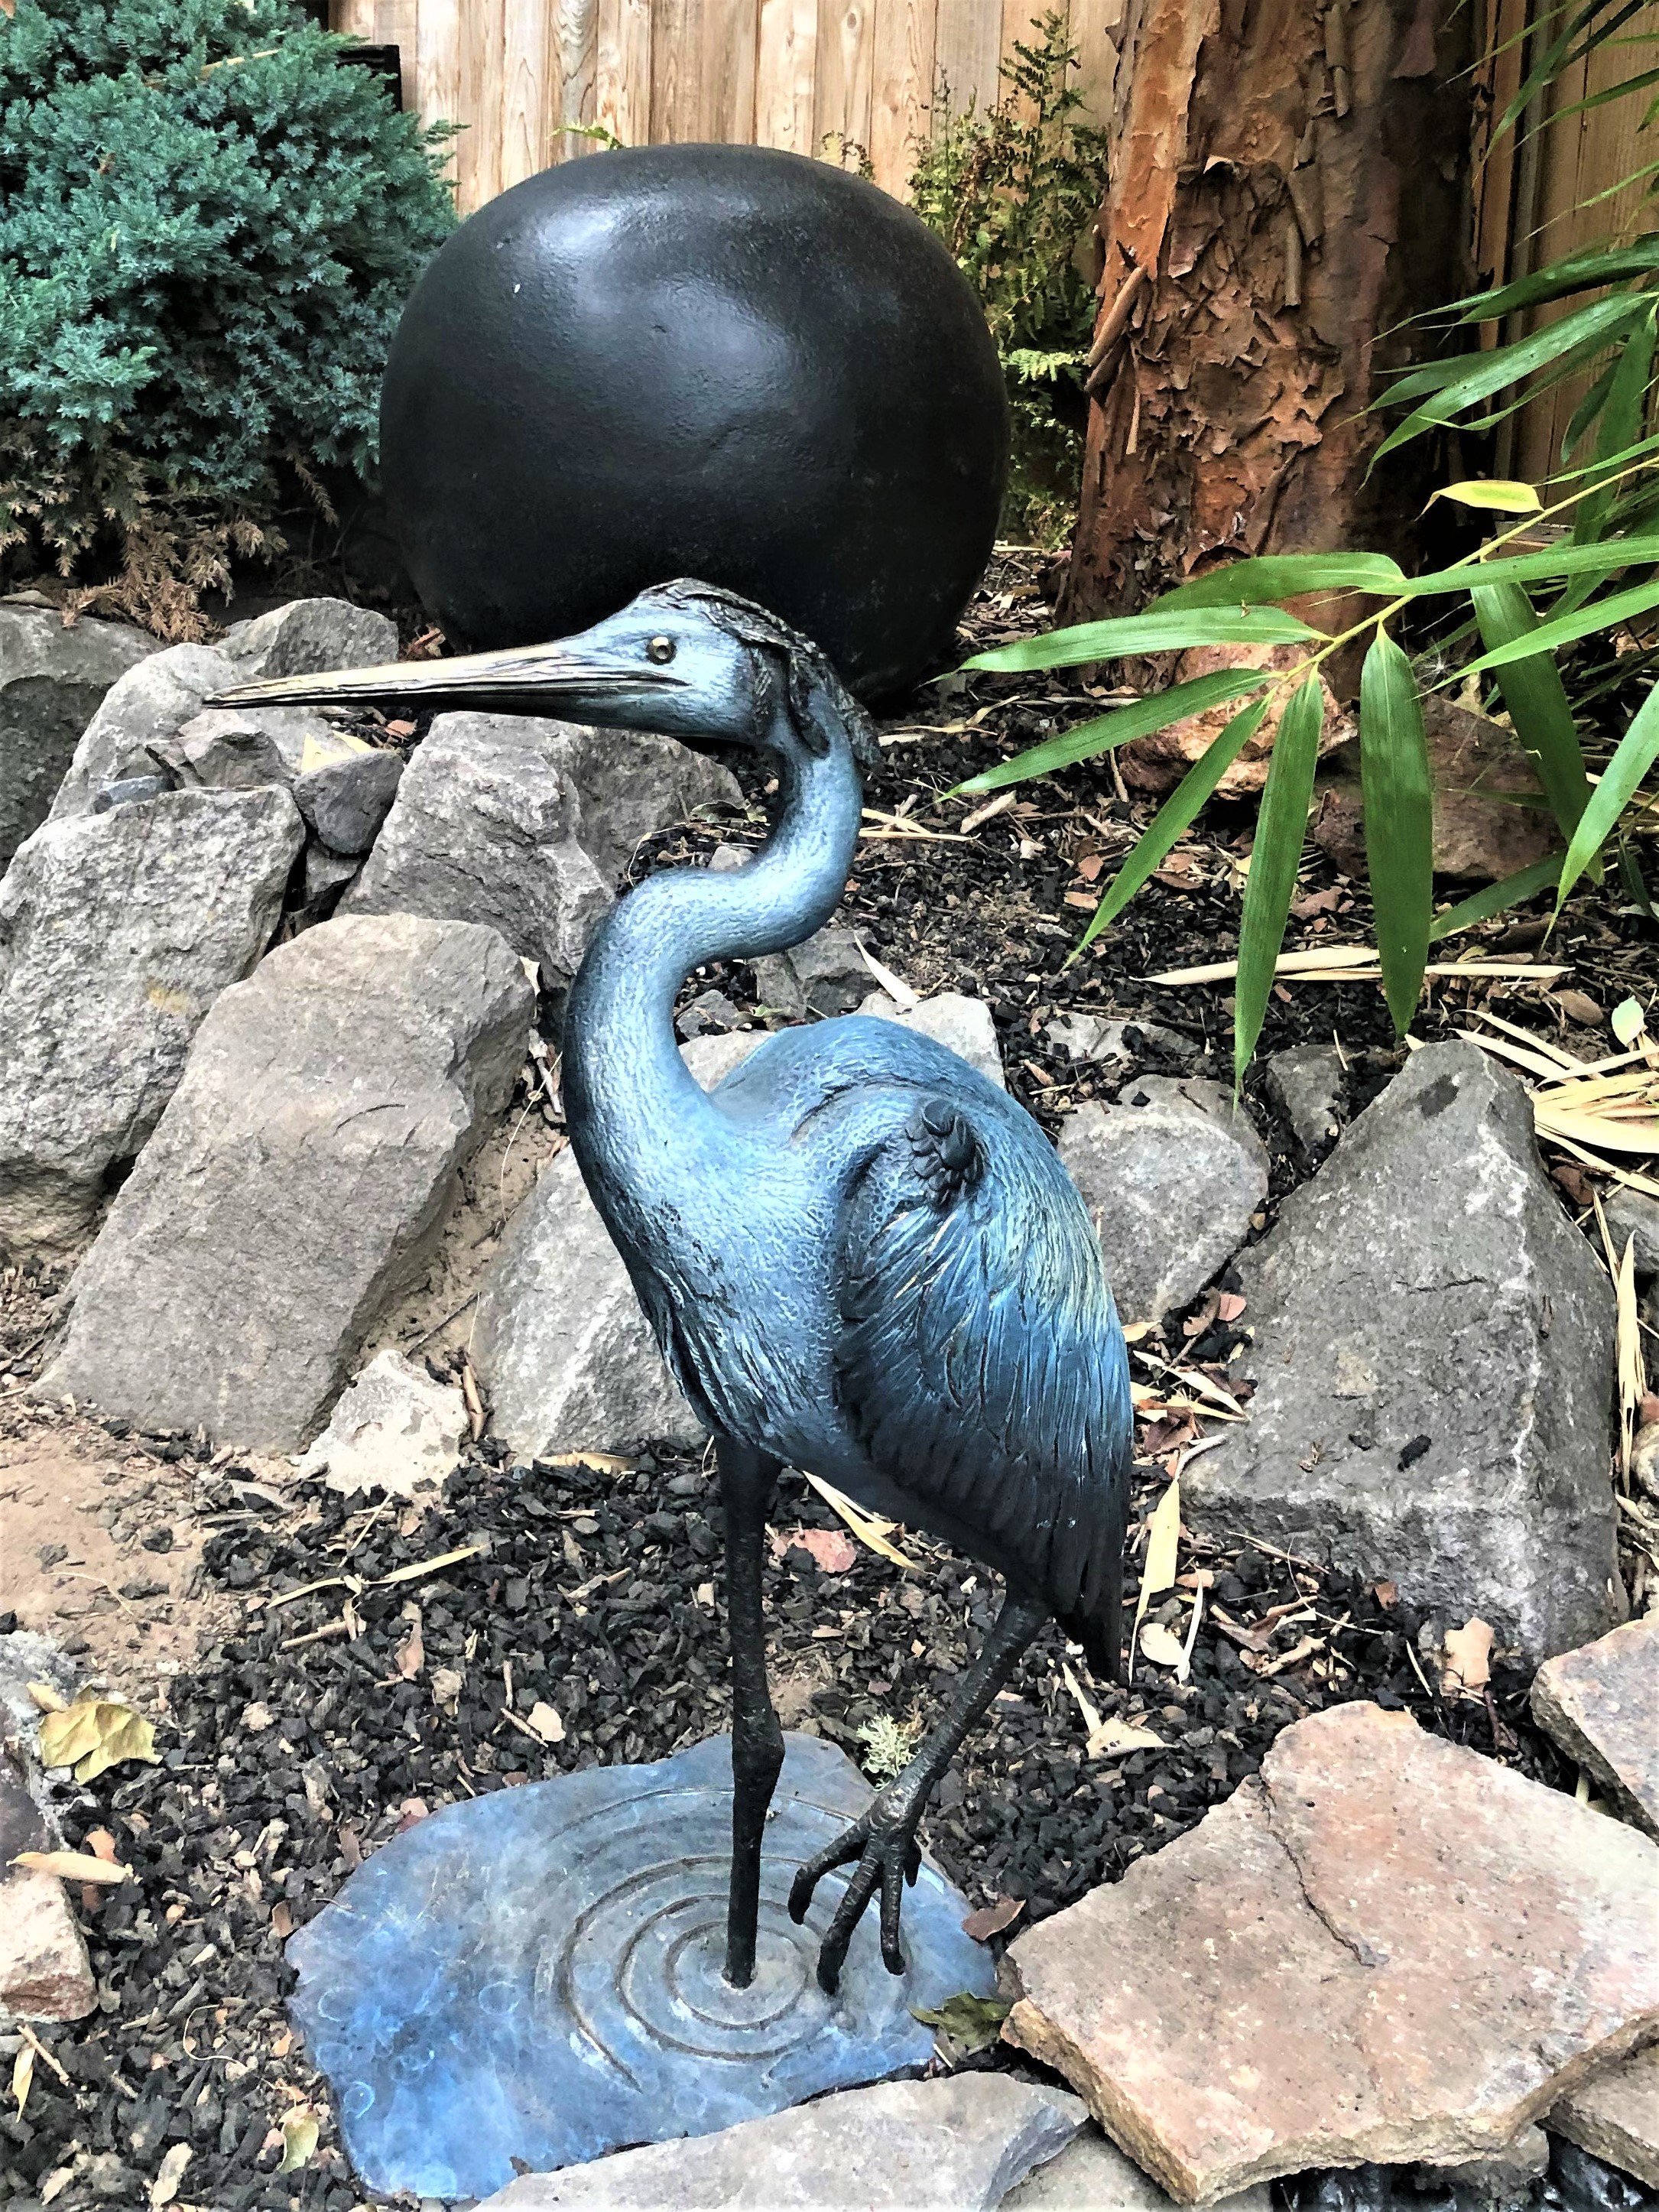 Joe Jumalon; Serentiy Blue Heron, 2019, Original Sculpture Bronze, 10 x 24 inches. Artwork description: 241 The Serenity Blue Heron is a limited edition of exquisite wildlife art.  Blue herons are waders, typically living along coastlines, in marshes, or near the shores of ponds and streams.  Most often they stand perfectly still in the water which creates a calm, even serene, scene.  These ...